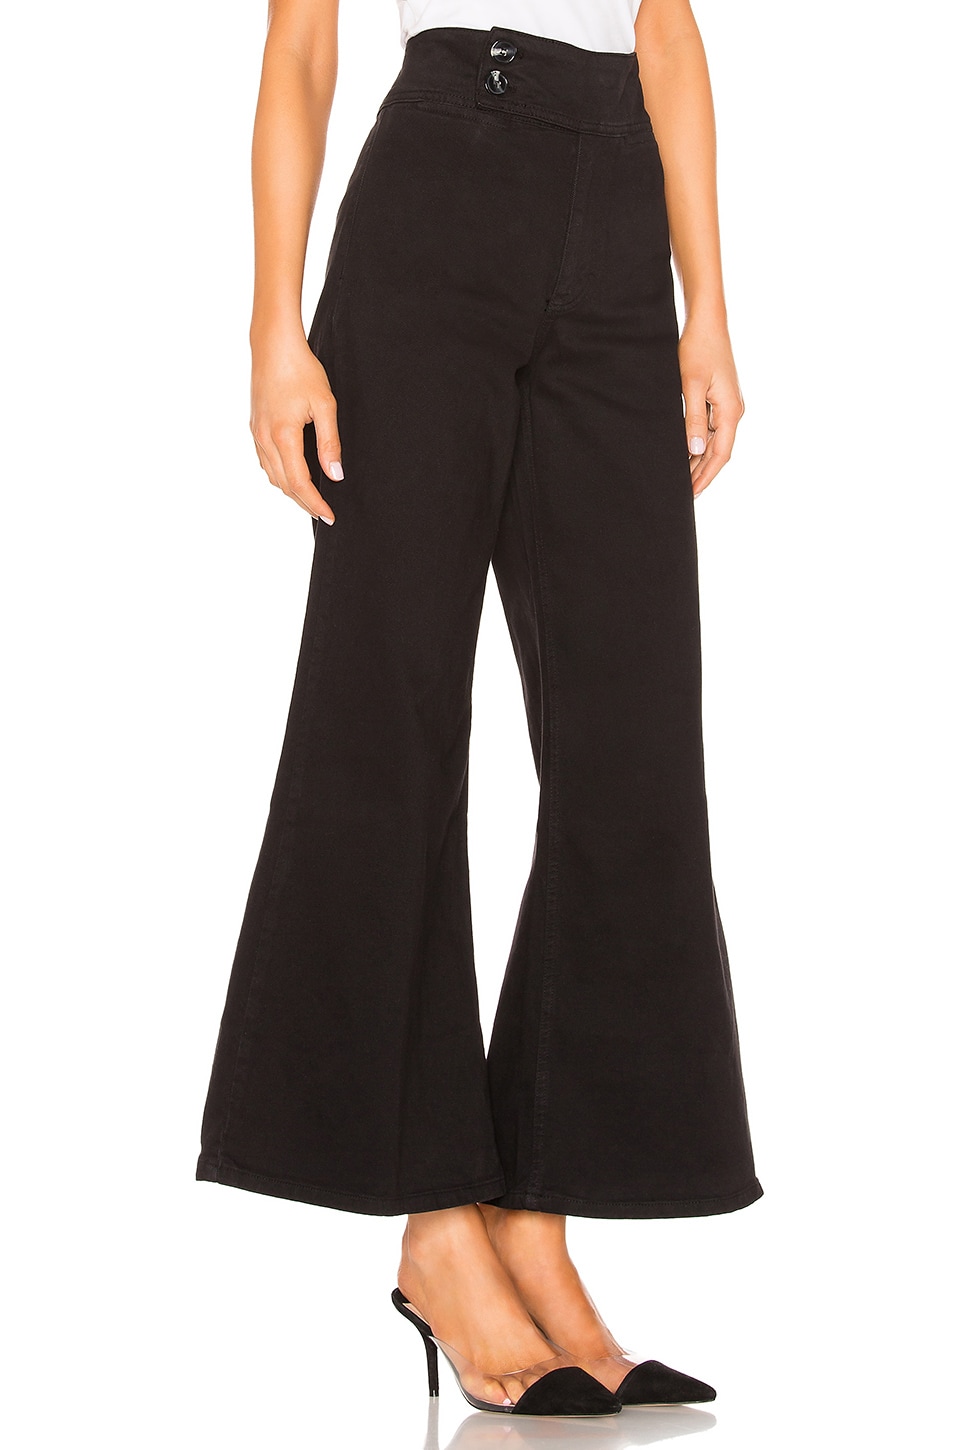 Free People Youthquake Bell Bottom Pant in Black | REVOLVE